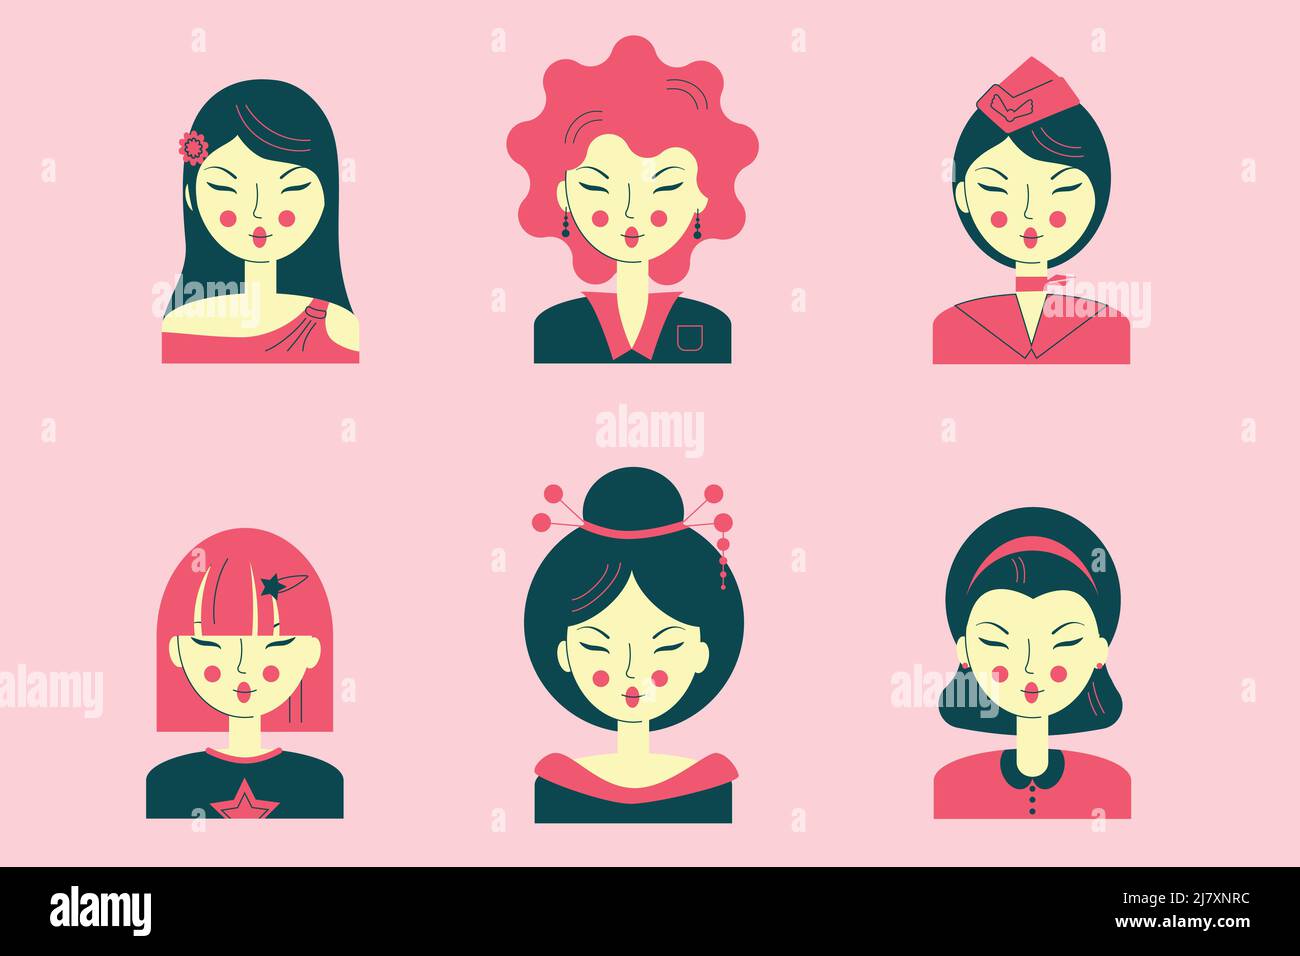 Set of avatars with asian girls profession suit career. Pink cute set with girl black hair illustration vector Stock Vector